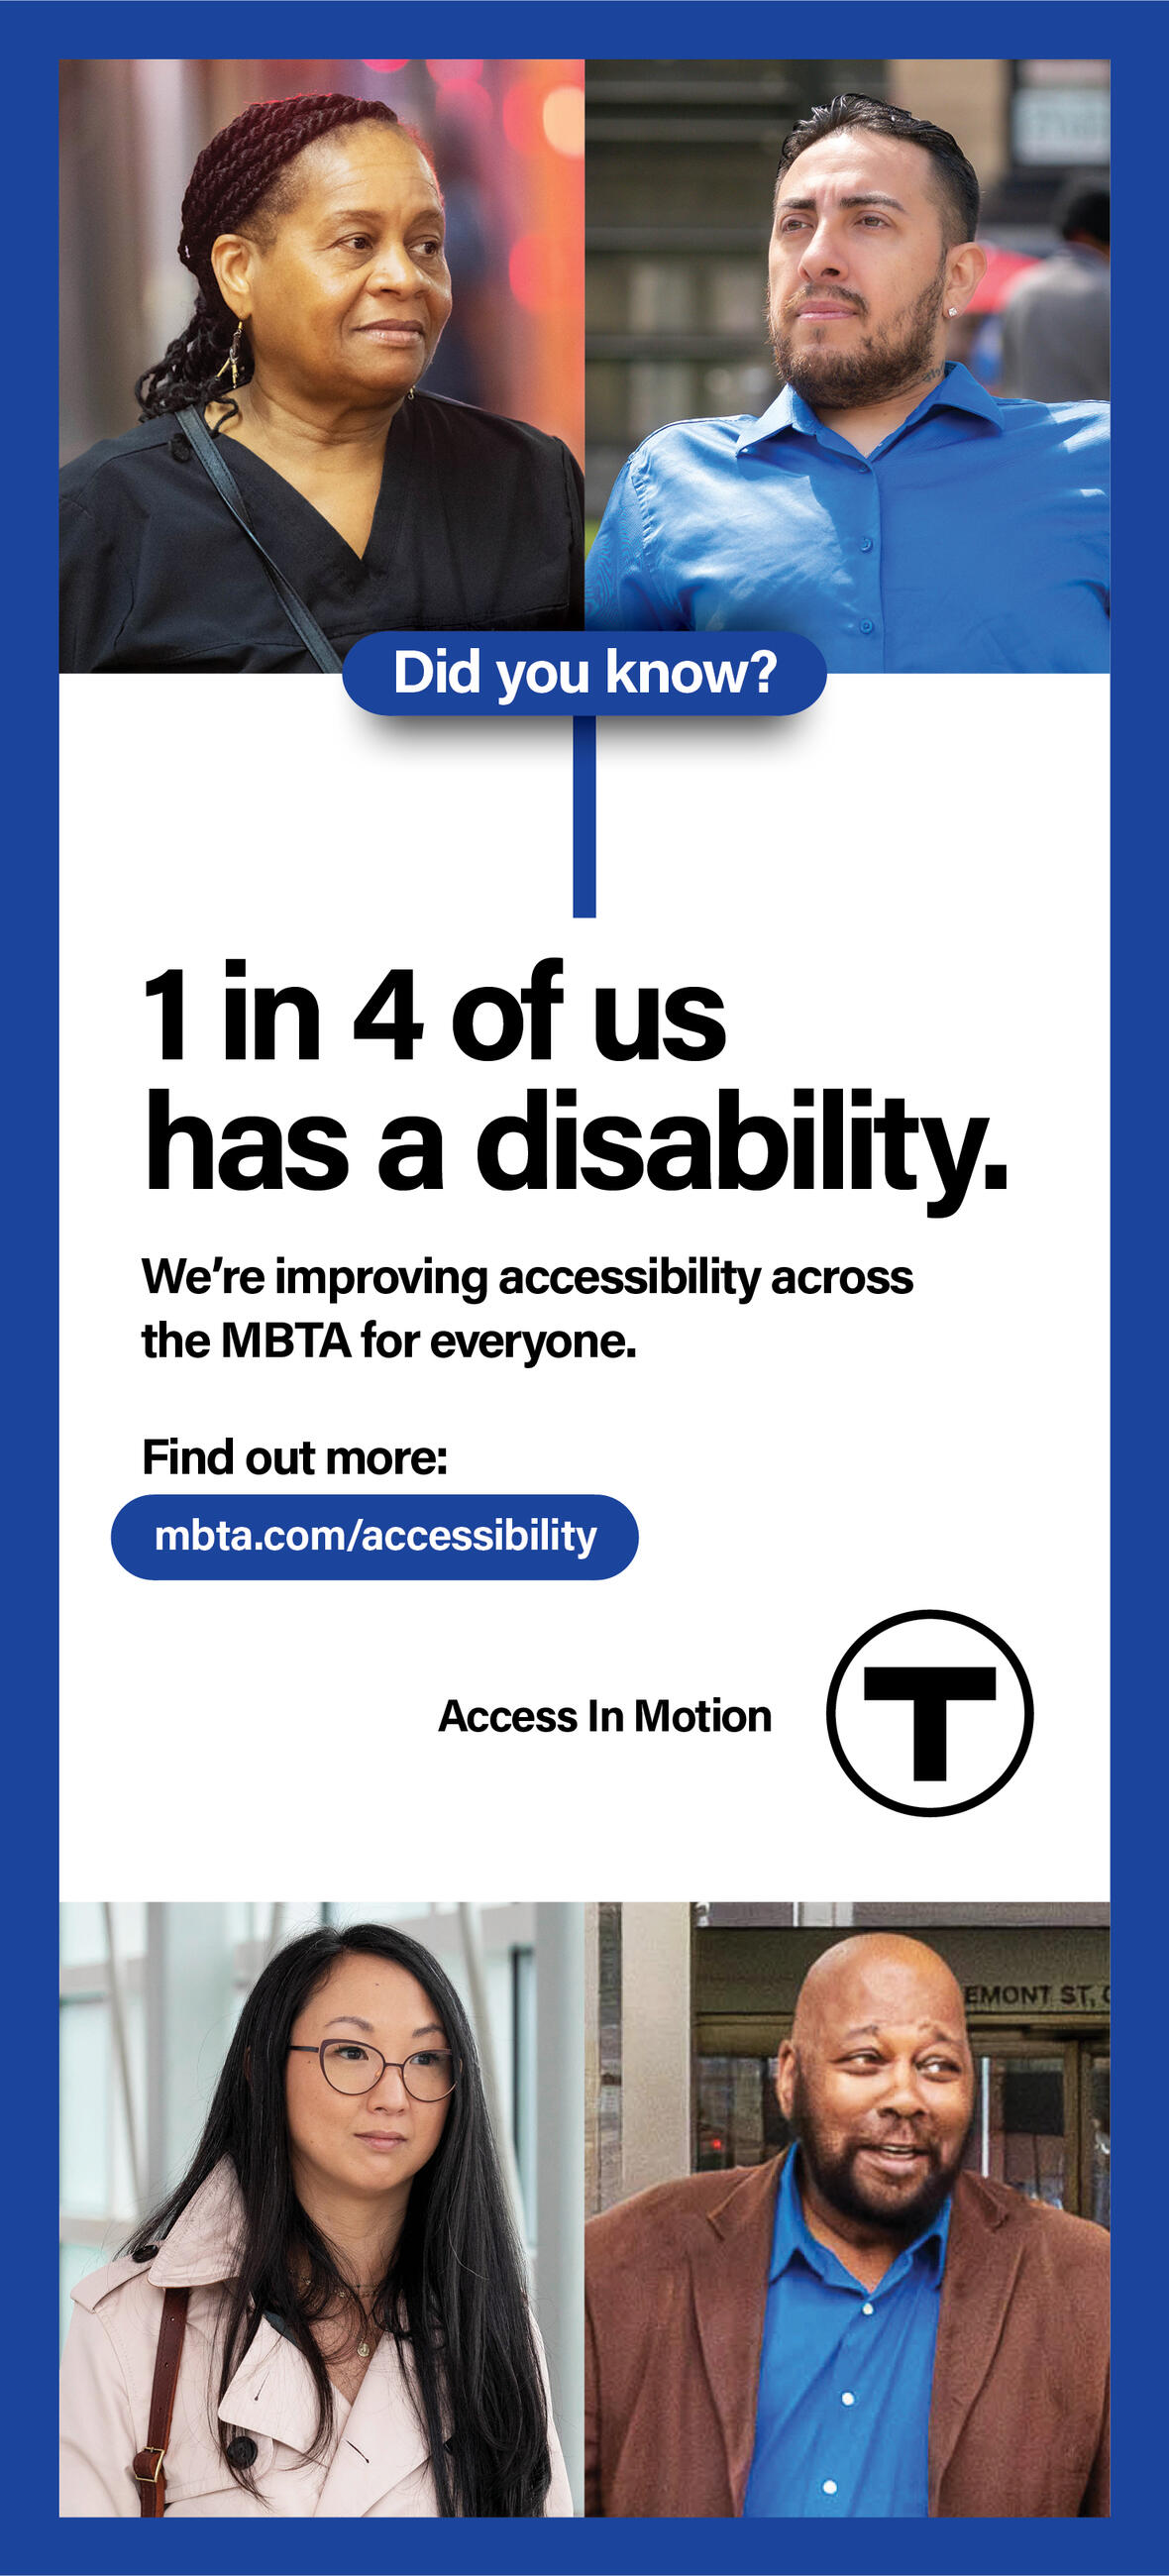 Four headshots, from top to bottom: an African American woman with her braids pulled back; a Latino man with facial hair; an Asian American woman wearing glasses; and a bald African American man. Text reads: “Did you know? 1 in 4 of us has a disability.” Smaller text reads: “We’re improving accessibility across the MBTA for everyone. Find out more: mbta.com/accessibility” followed by the “Access In Motion” tagline and the T logo.